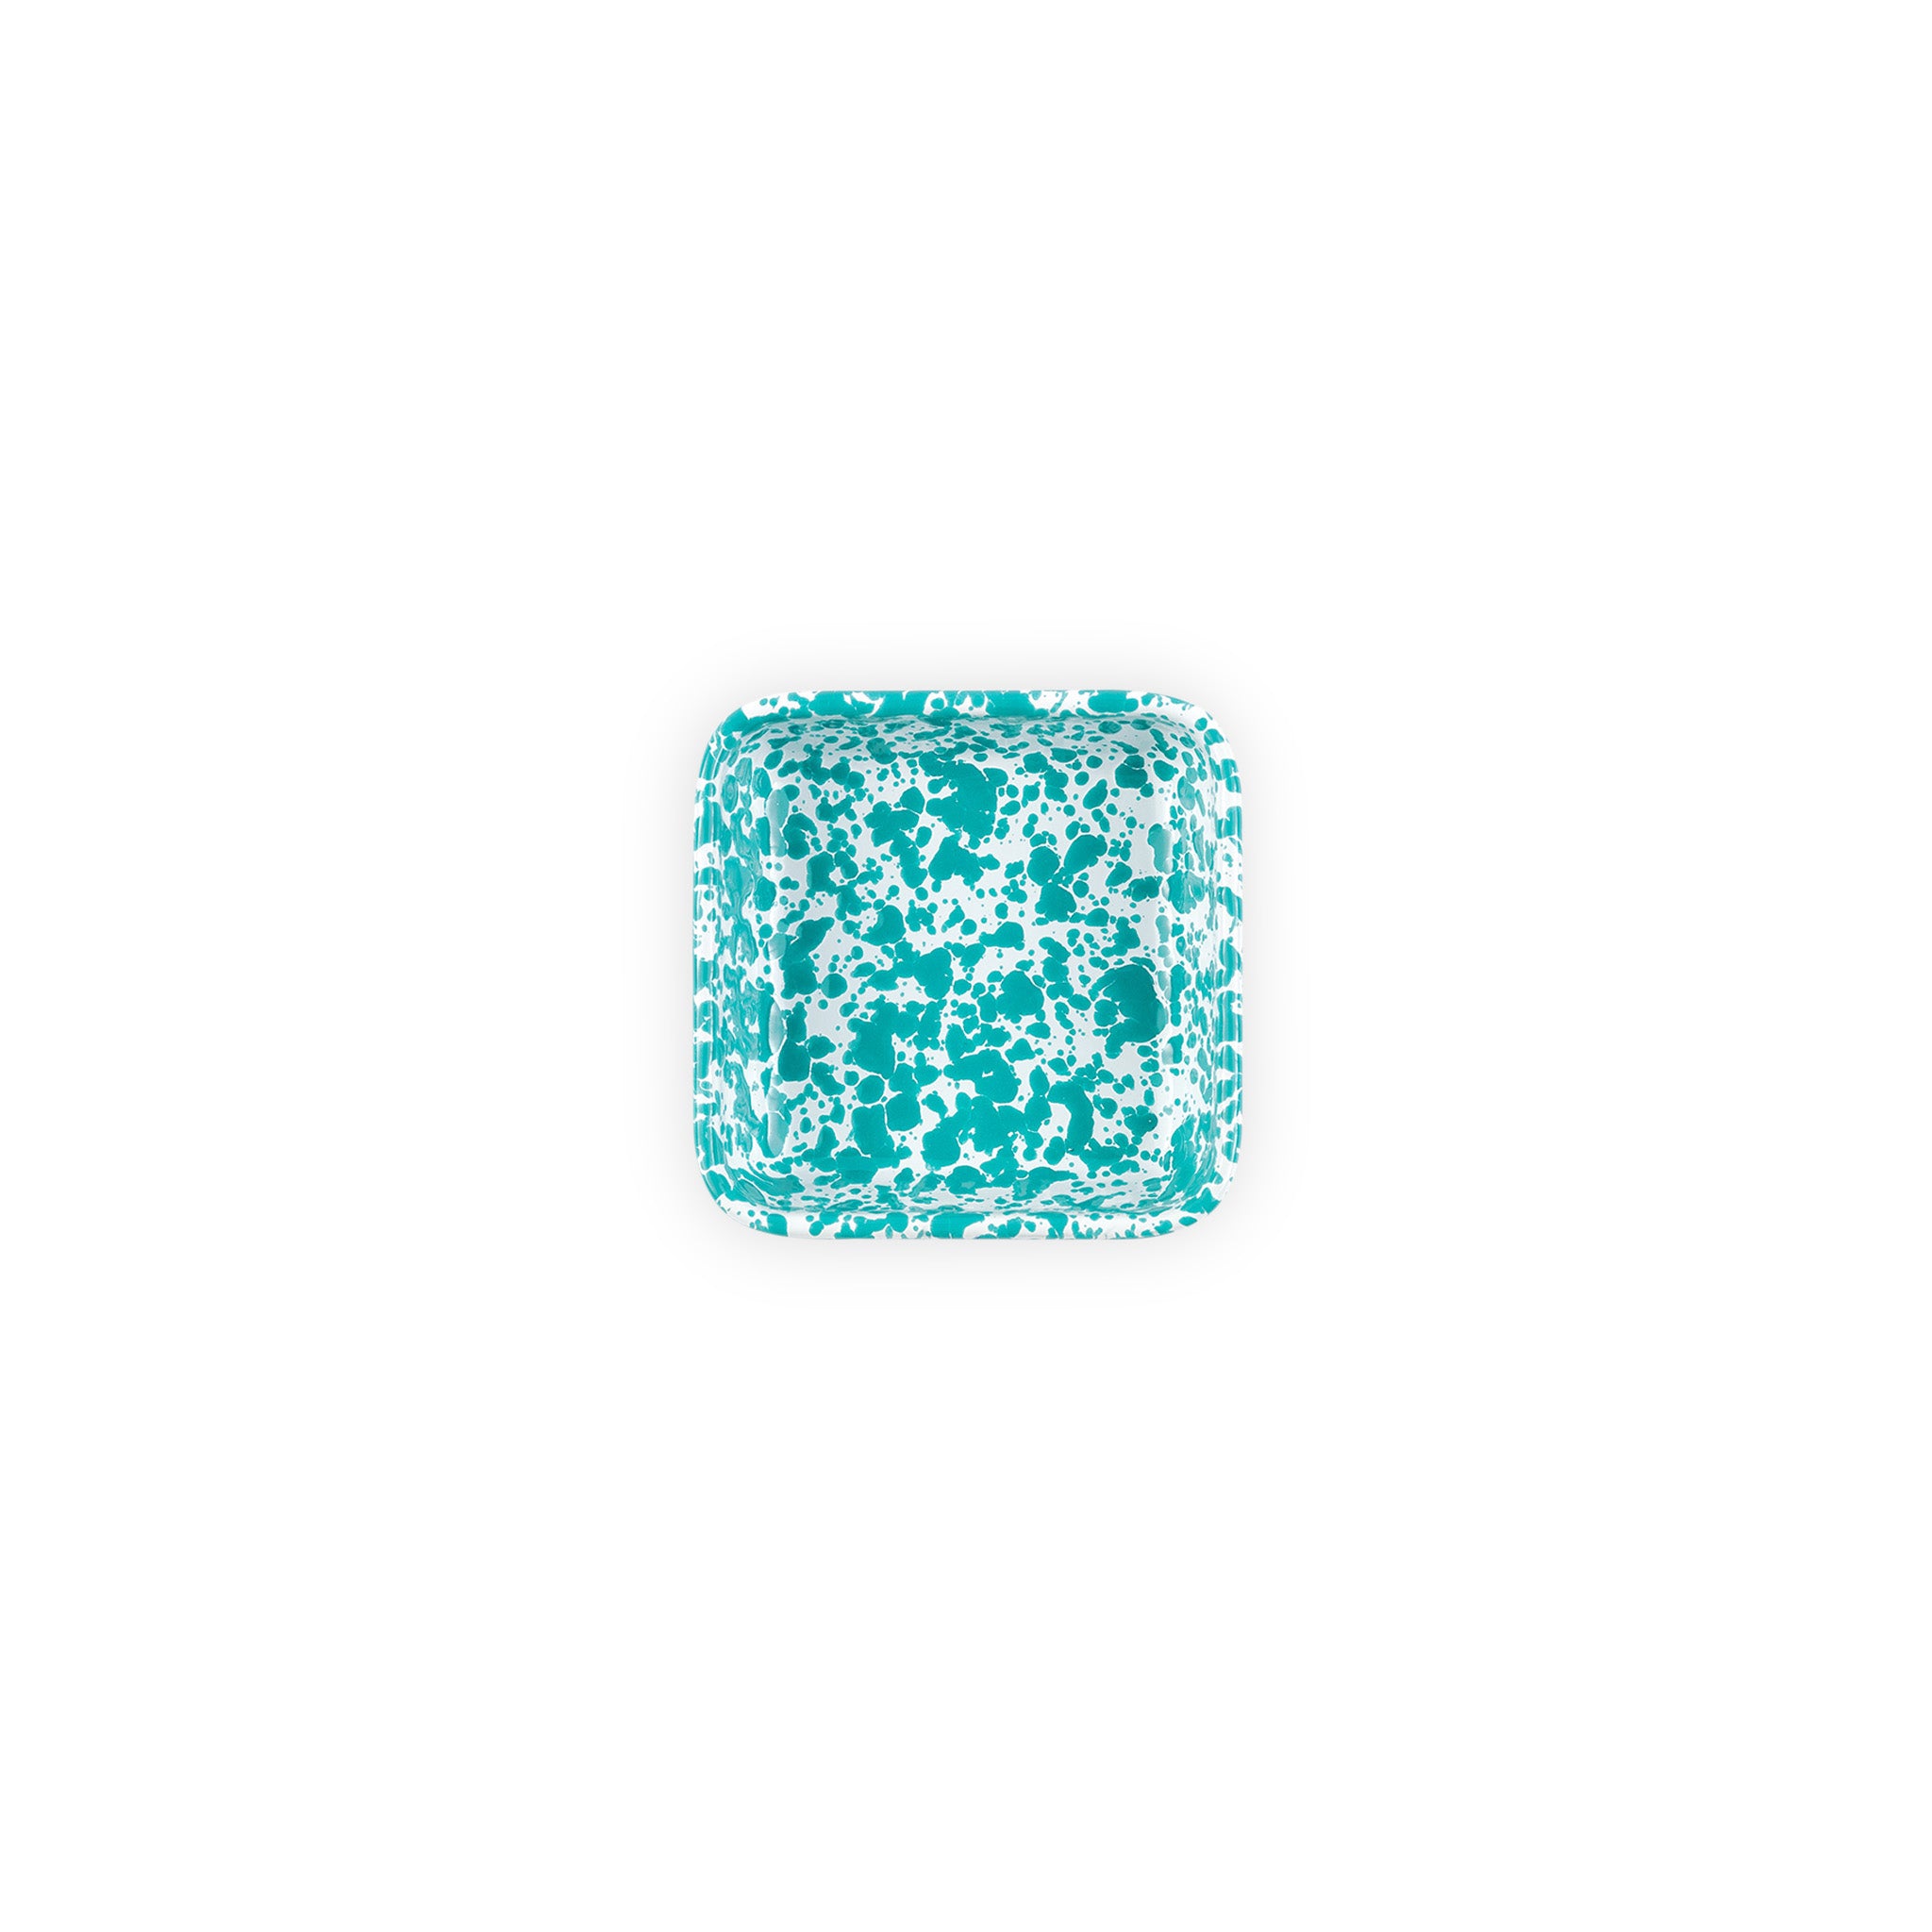 Splatter Small Square Tray - Turquoise